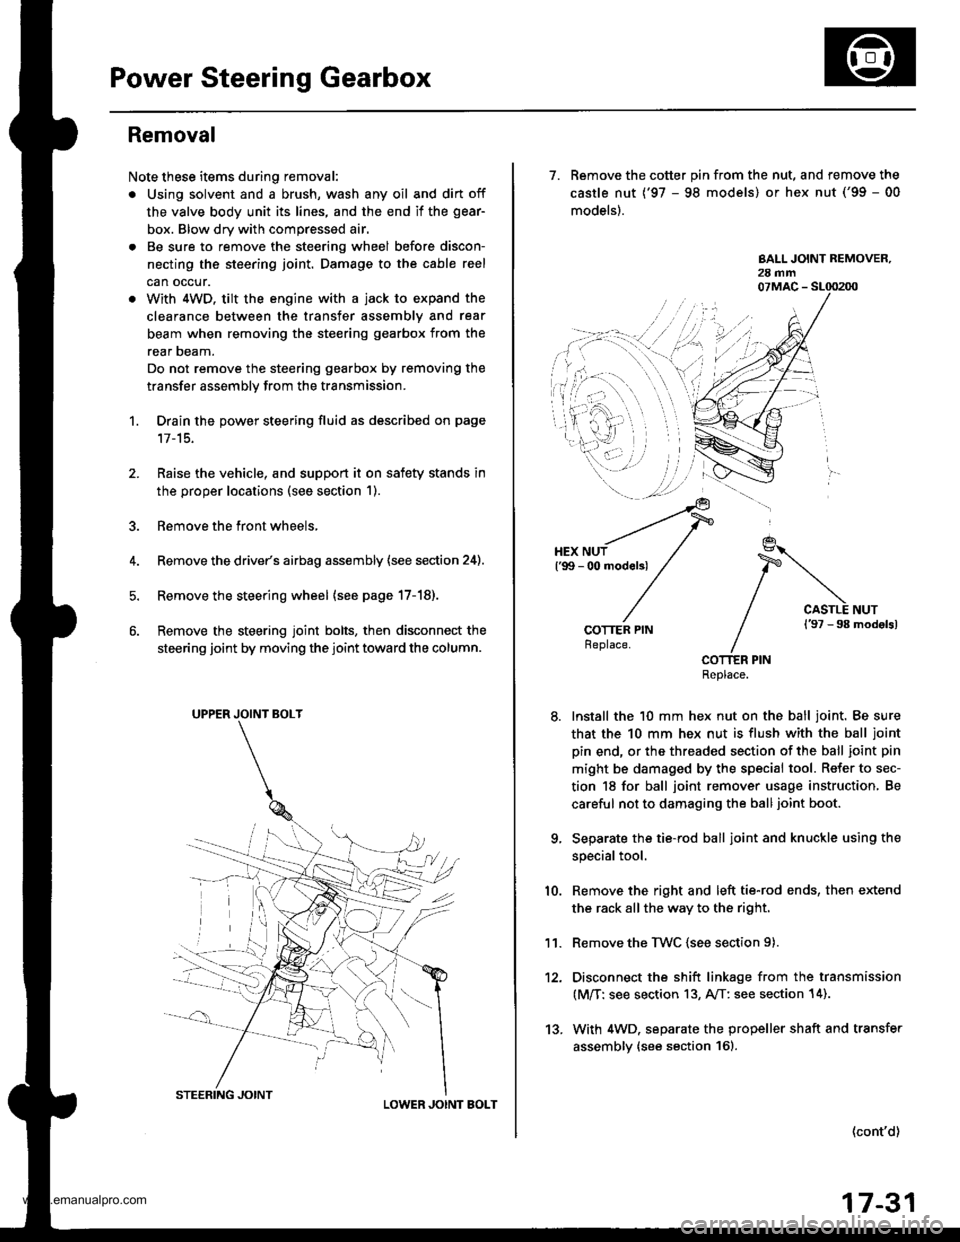 HONDA CR-V 1997 RD1-RD3 / 1.G User Guide 
Power Steering Gearbox
Removal
Note these items during removal:
. Using solvent and a brush, wash any oil and dirt off
the valve body unit its lines, and the end if the gear-
box. Blow dry with compr